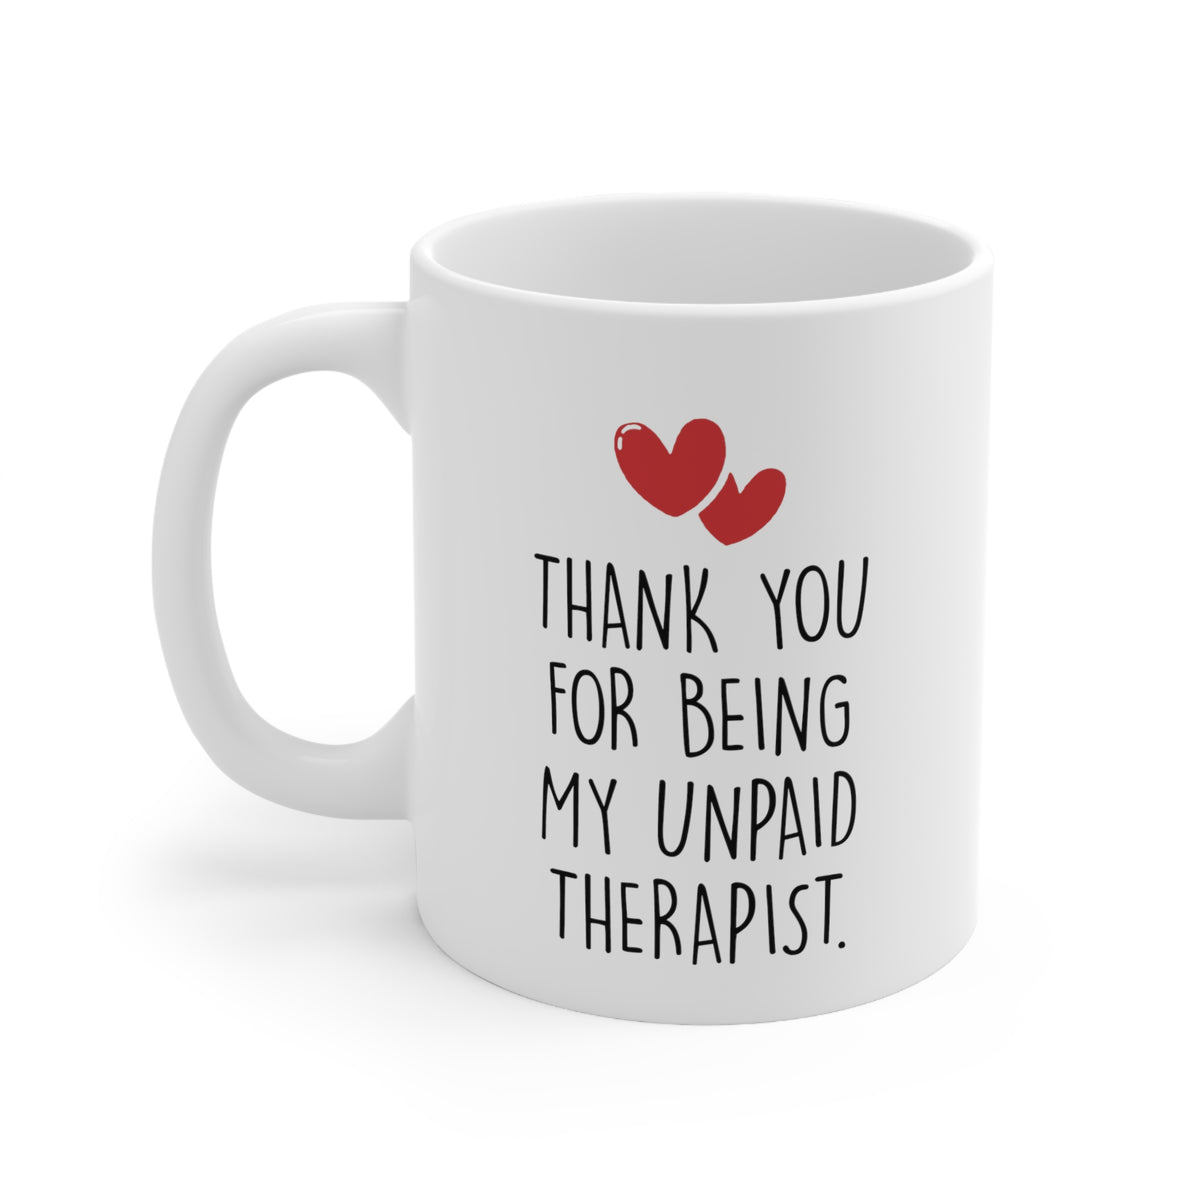 Valentins Day, Thank You For Being My Unpaid Therapist., Funny Coffee Mug For Him Her, Love Cup For Wife Husband